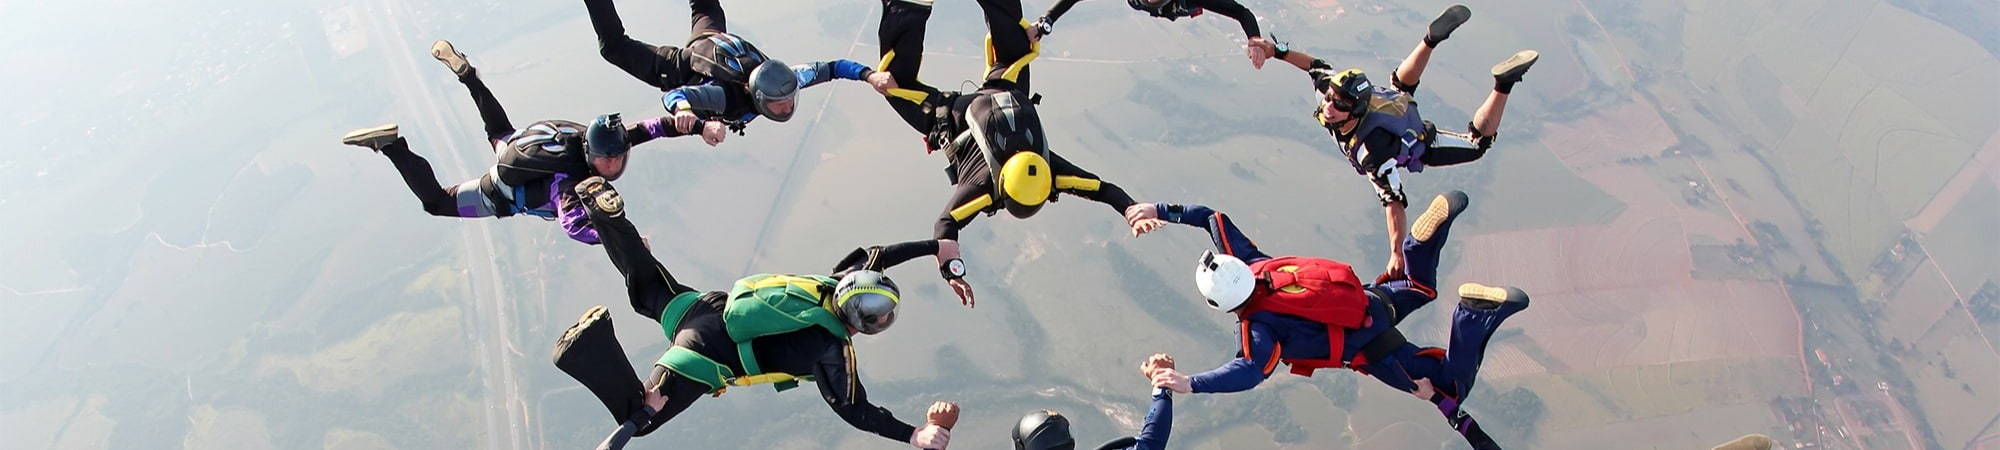 Team day out: I.T. Recruitment consultants skydiving together. TheDriveGroup.